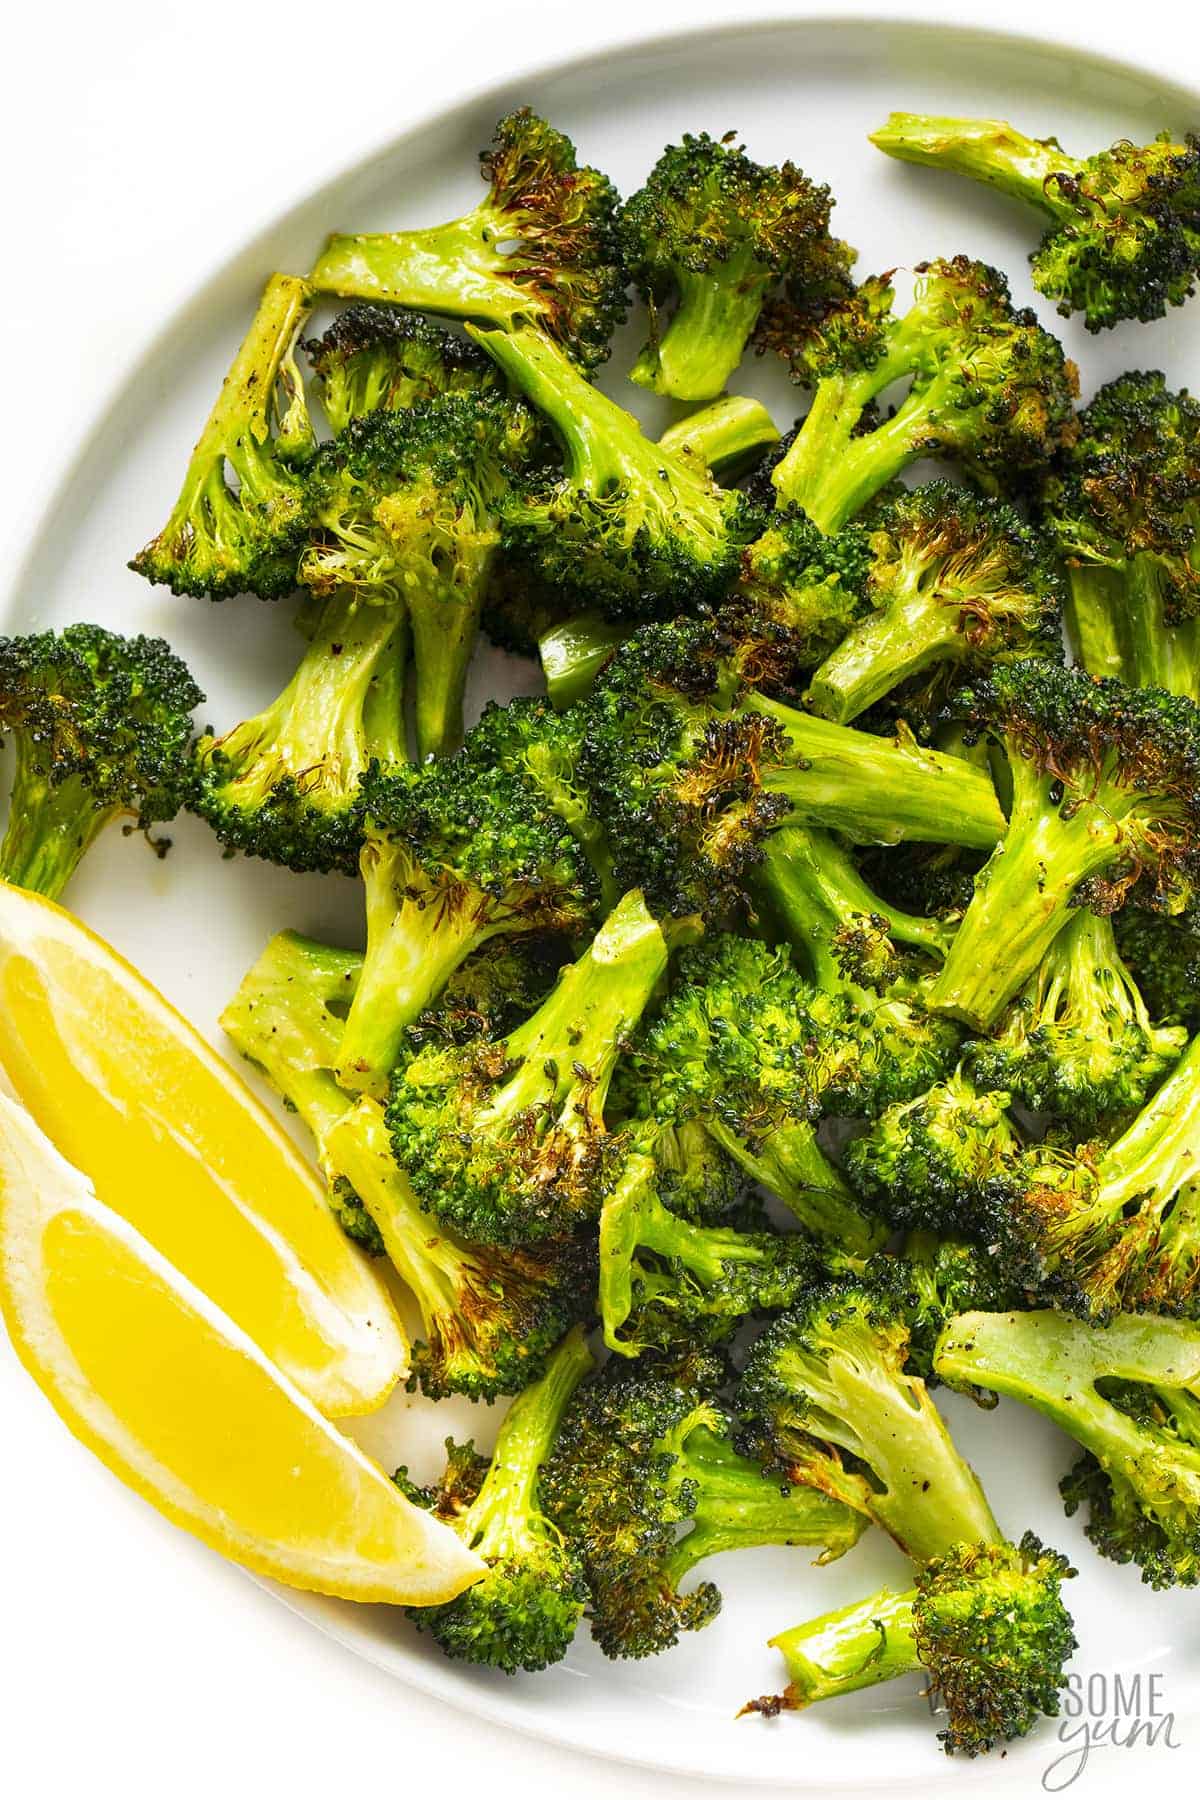 Broccoli and lemon wedges on a plate